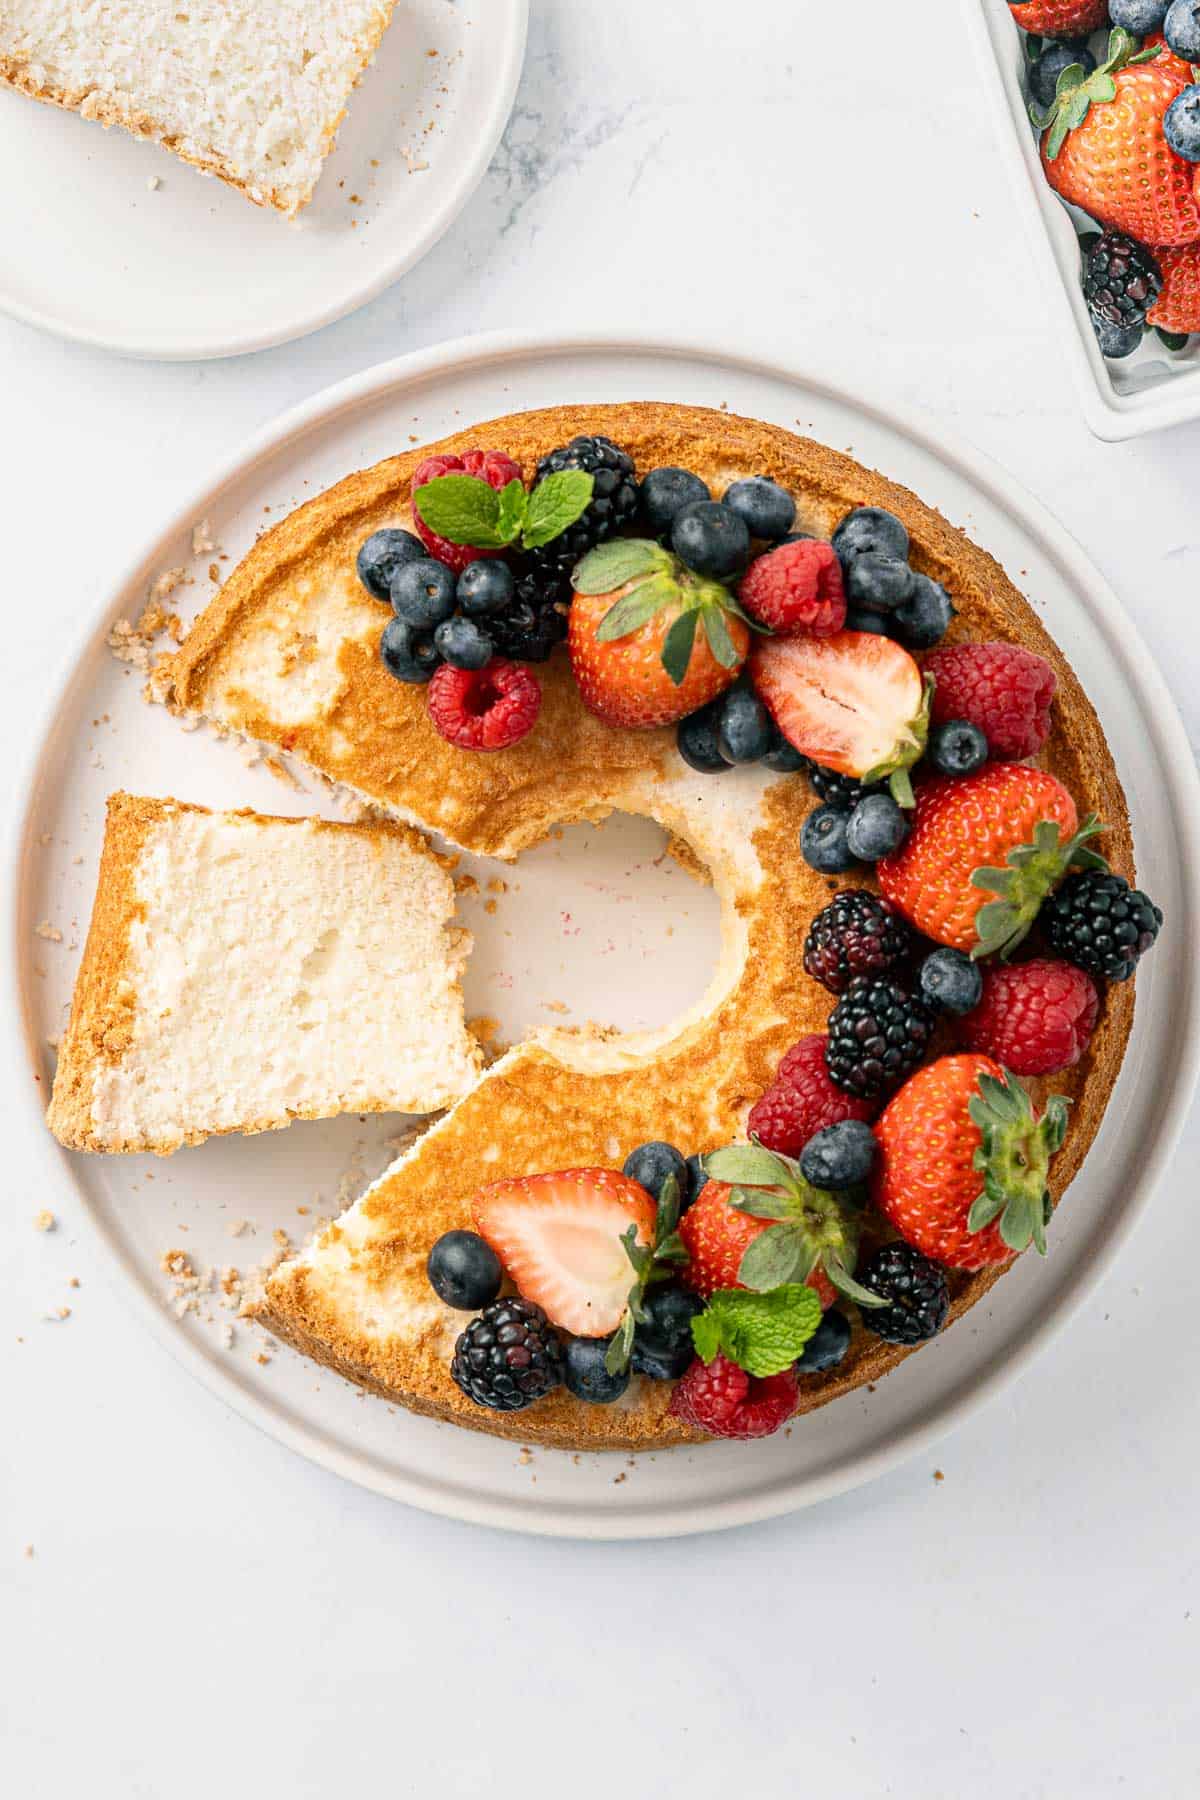 Angel food cake with a slice cut out and another slice on a plate nearby. Cake topped with fresh berries.